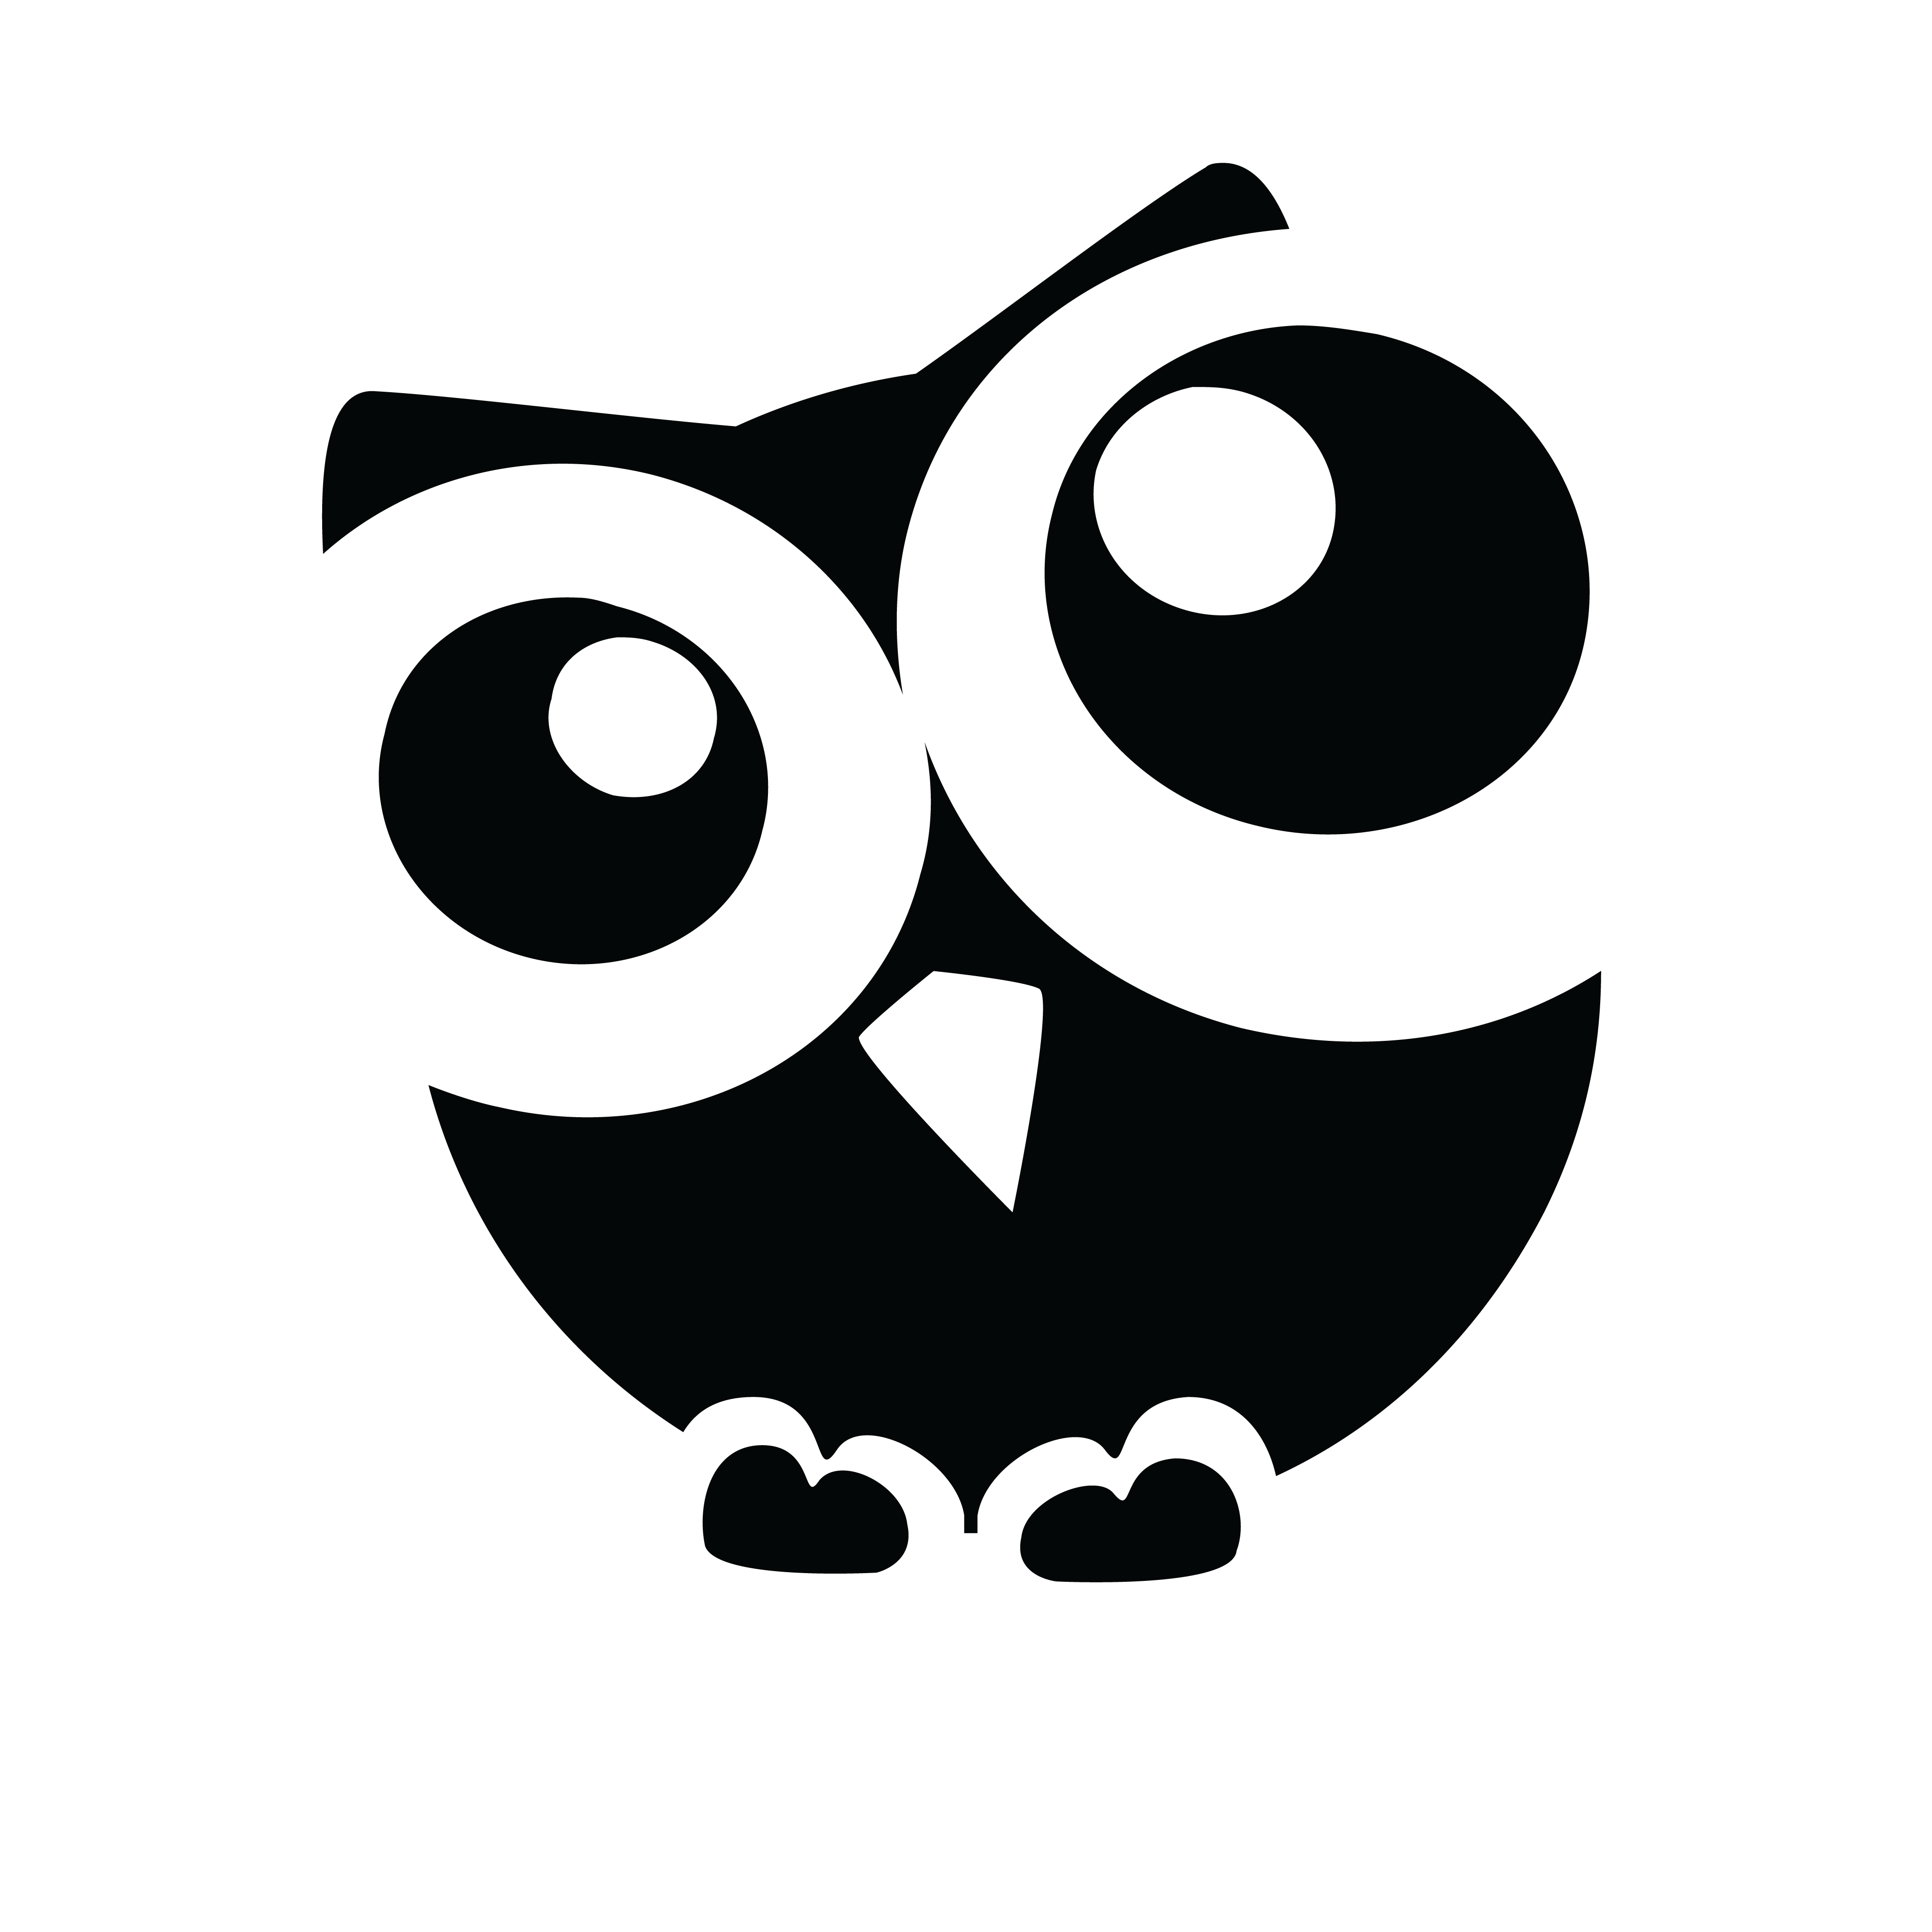 Black and White Owl Logo - Free Clipart Of A Curious Owl Black White Clip Art